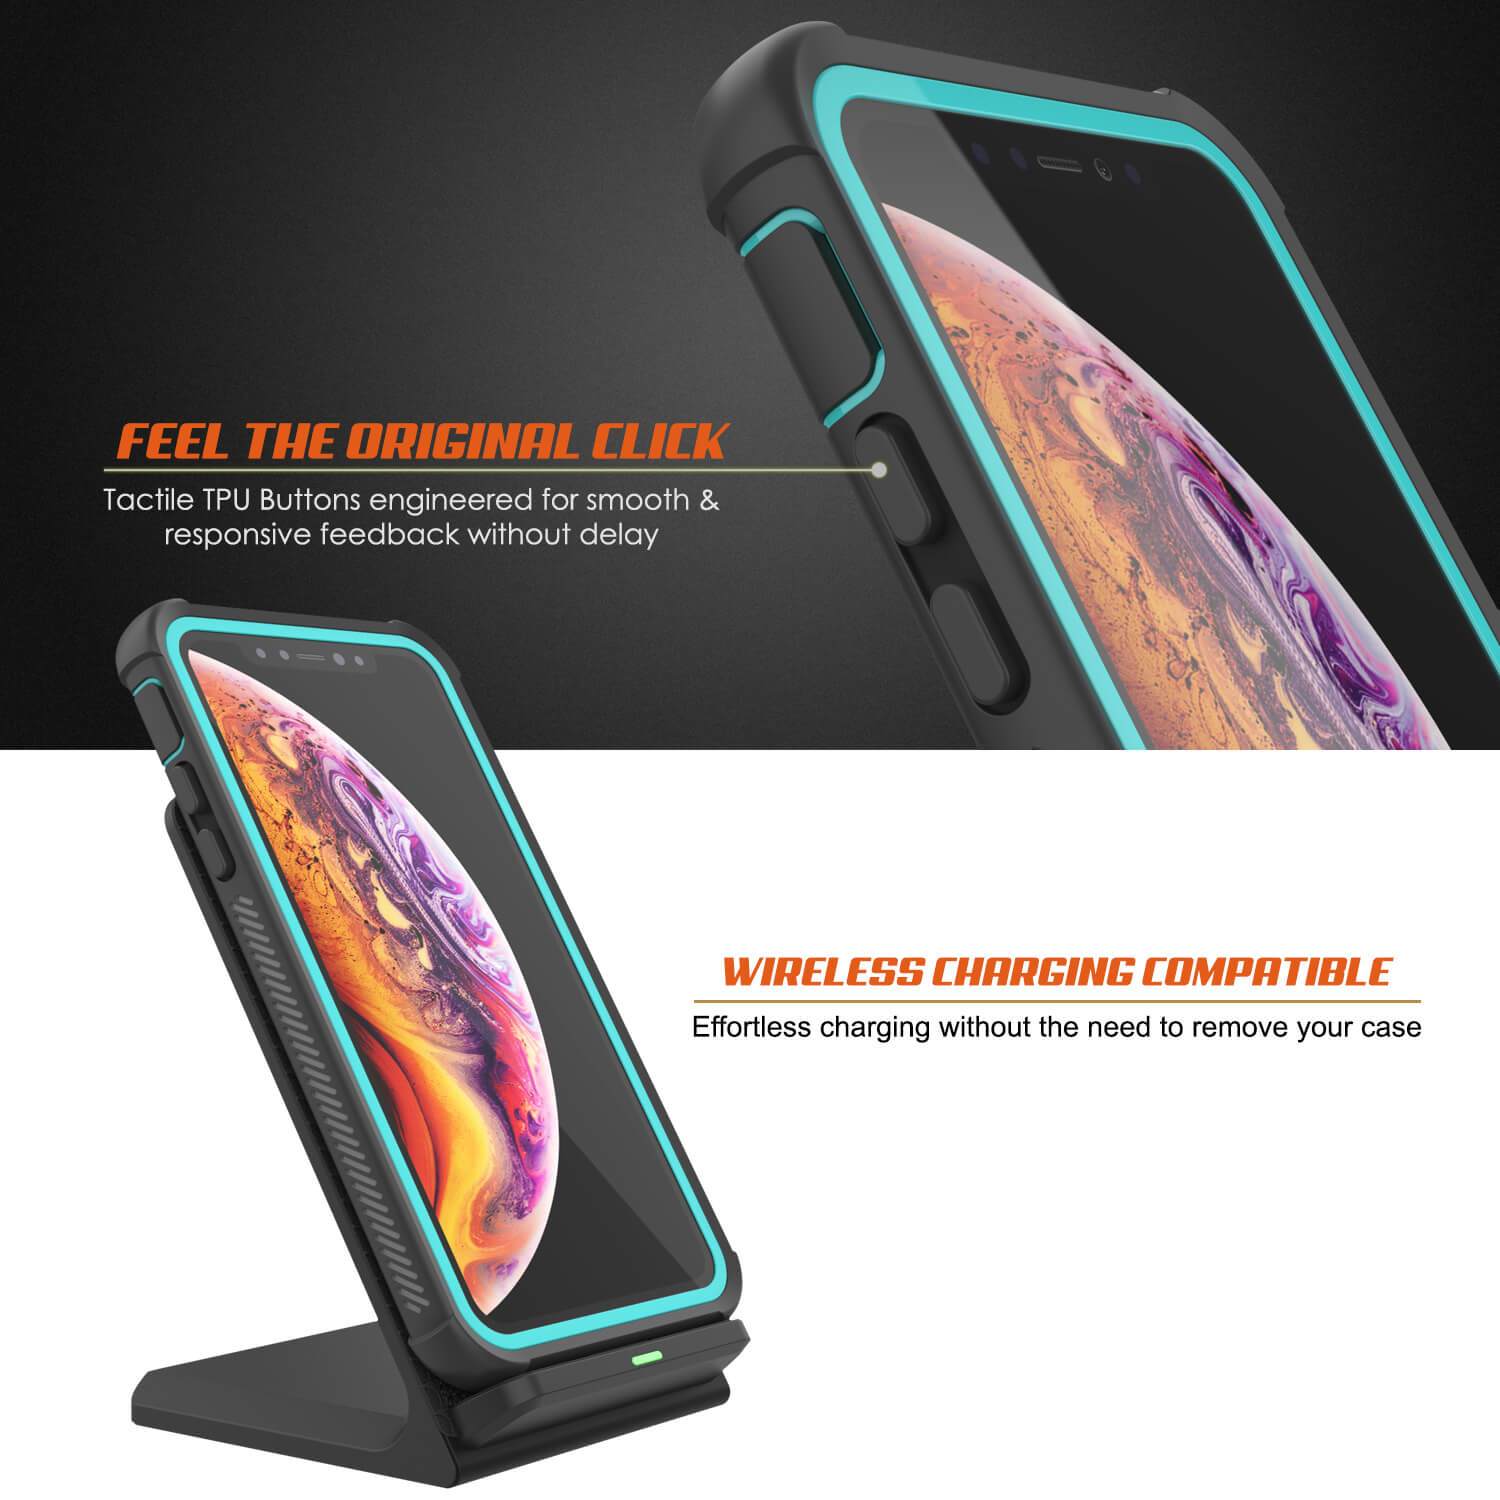 PunkCase iPhone XS Max Case, [Spartan Series] Clear Rugged Heavy Duty Cover W/Built in Screen Protector [Teal]